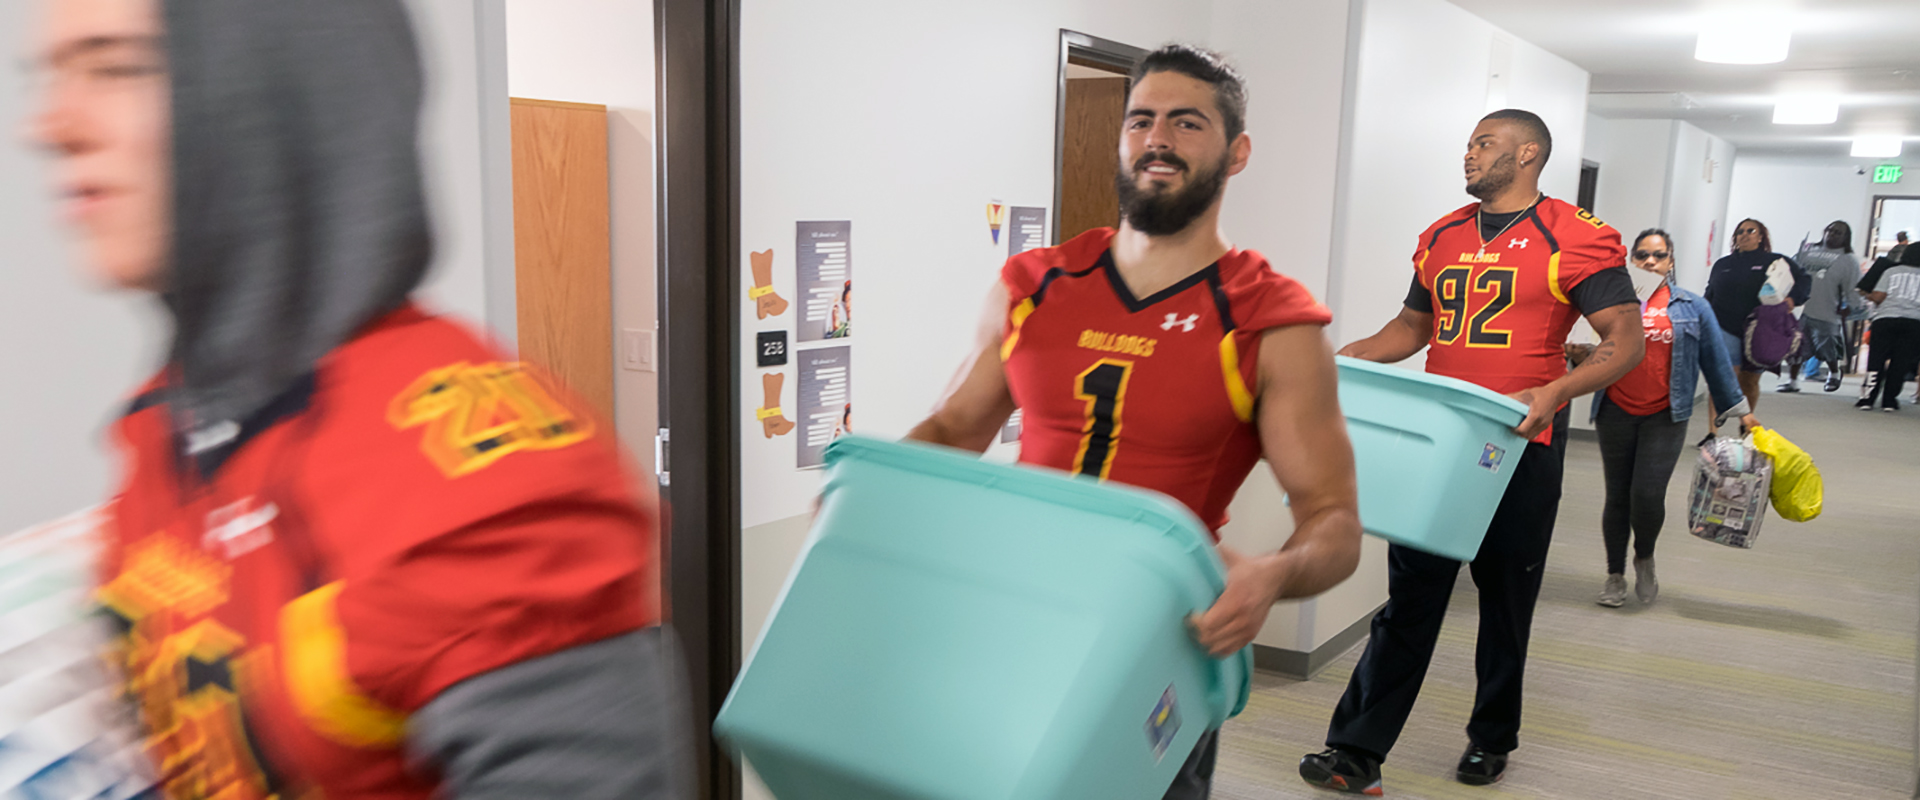 Ferris State University football players helping students moving into their residence hall